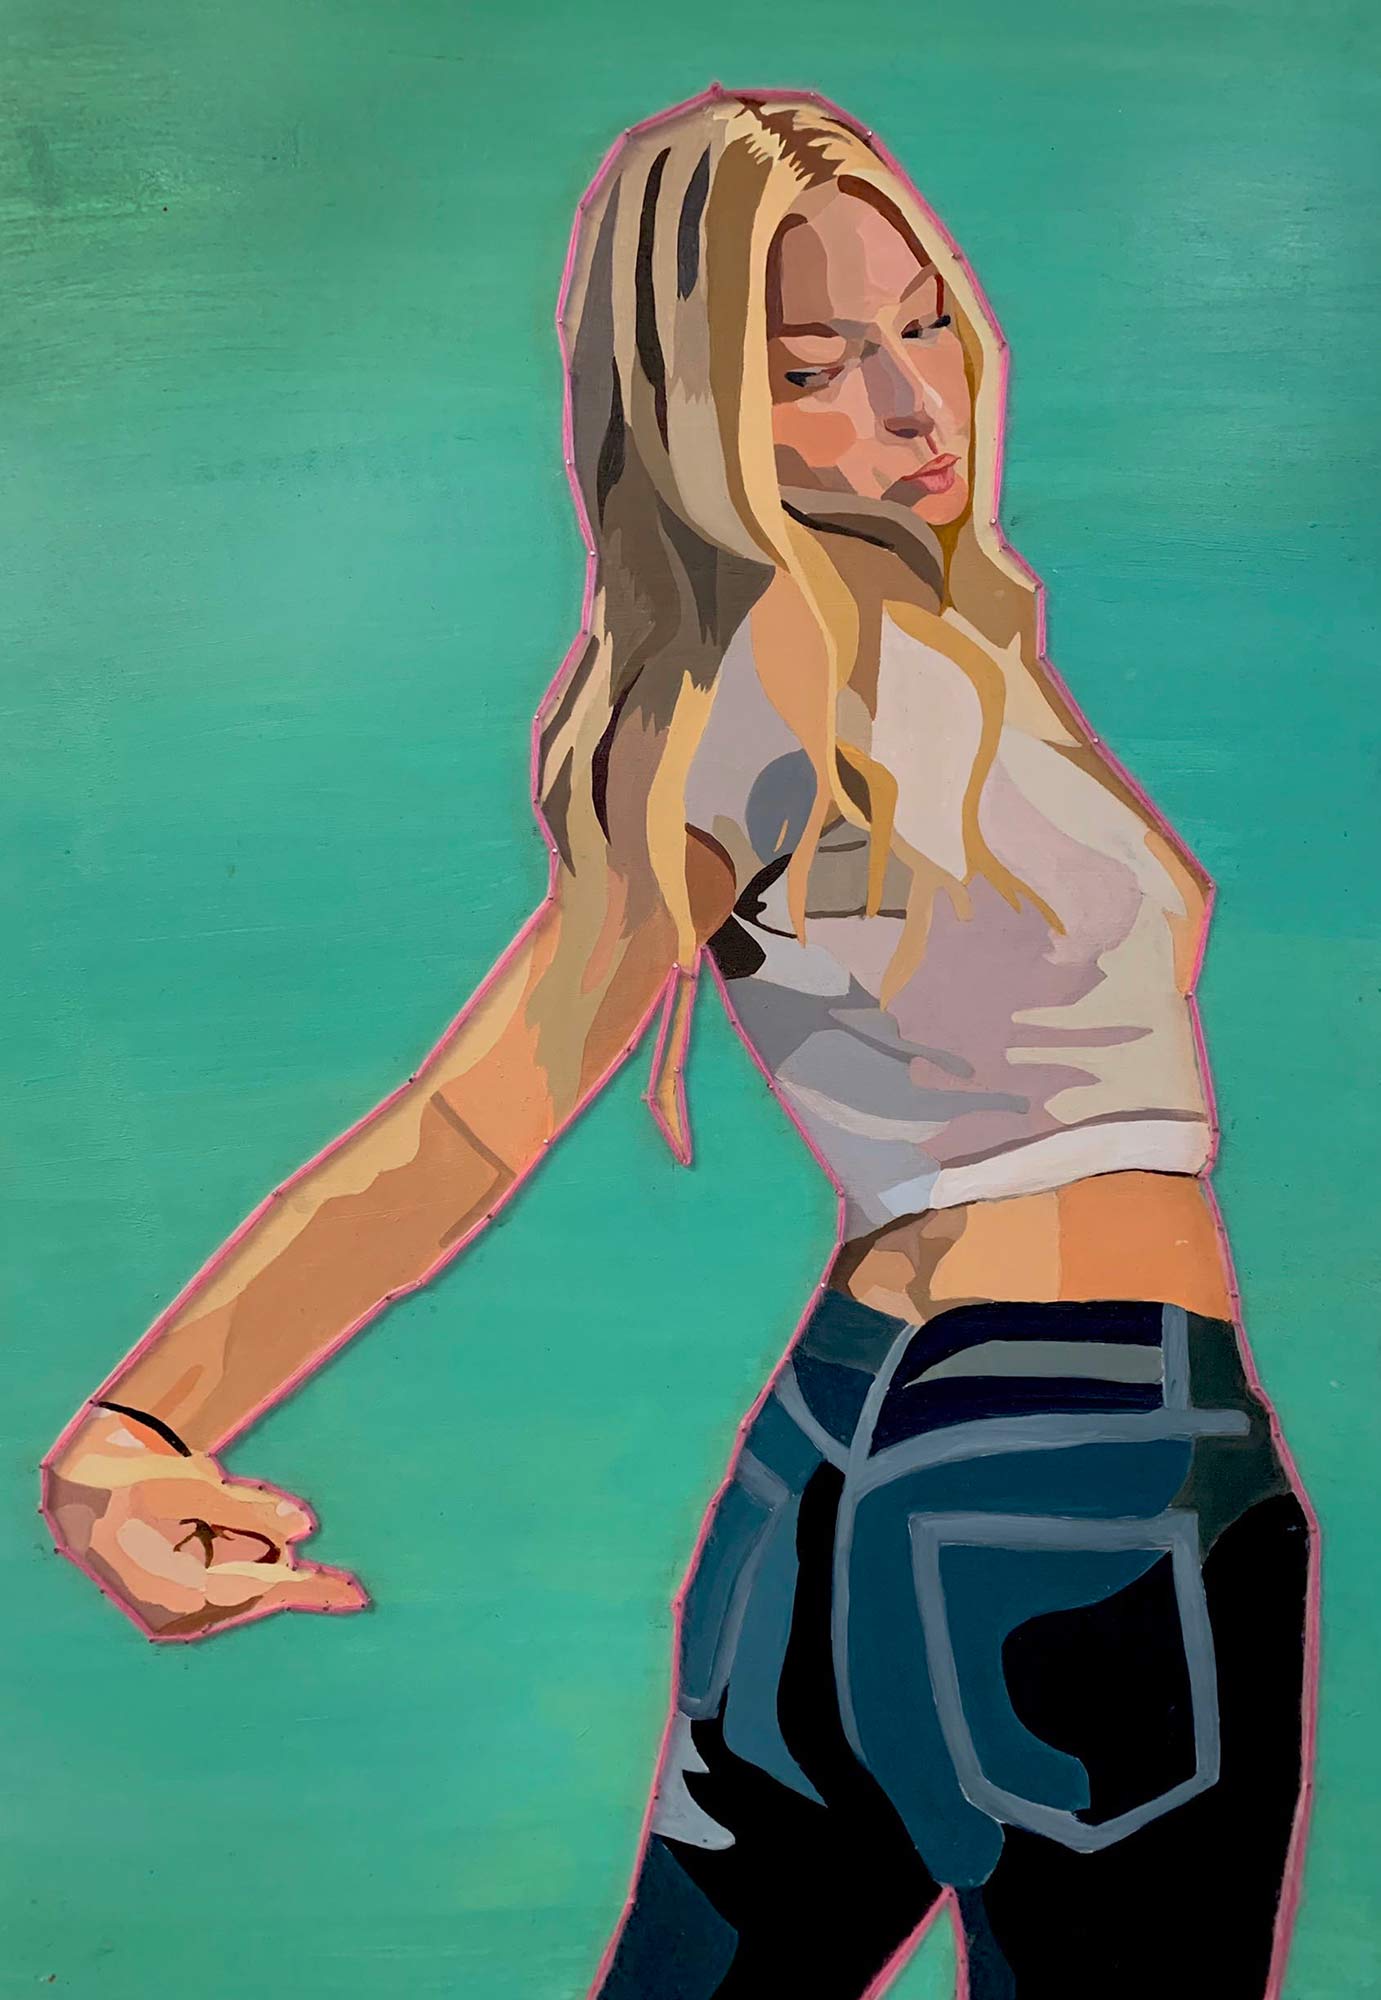 A painting of a blonde woman on a green background